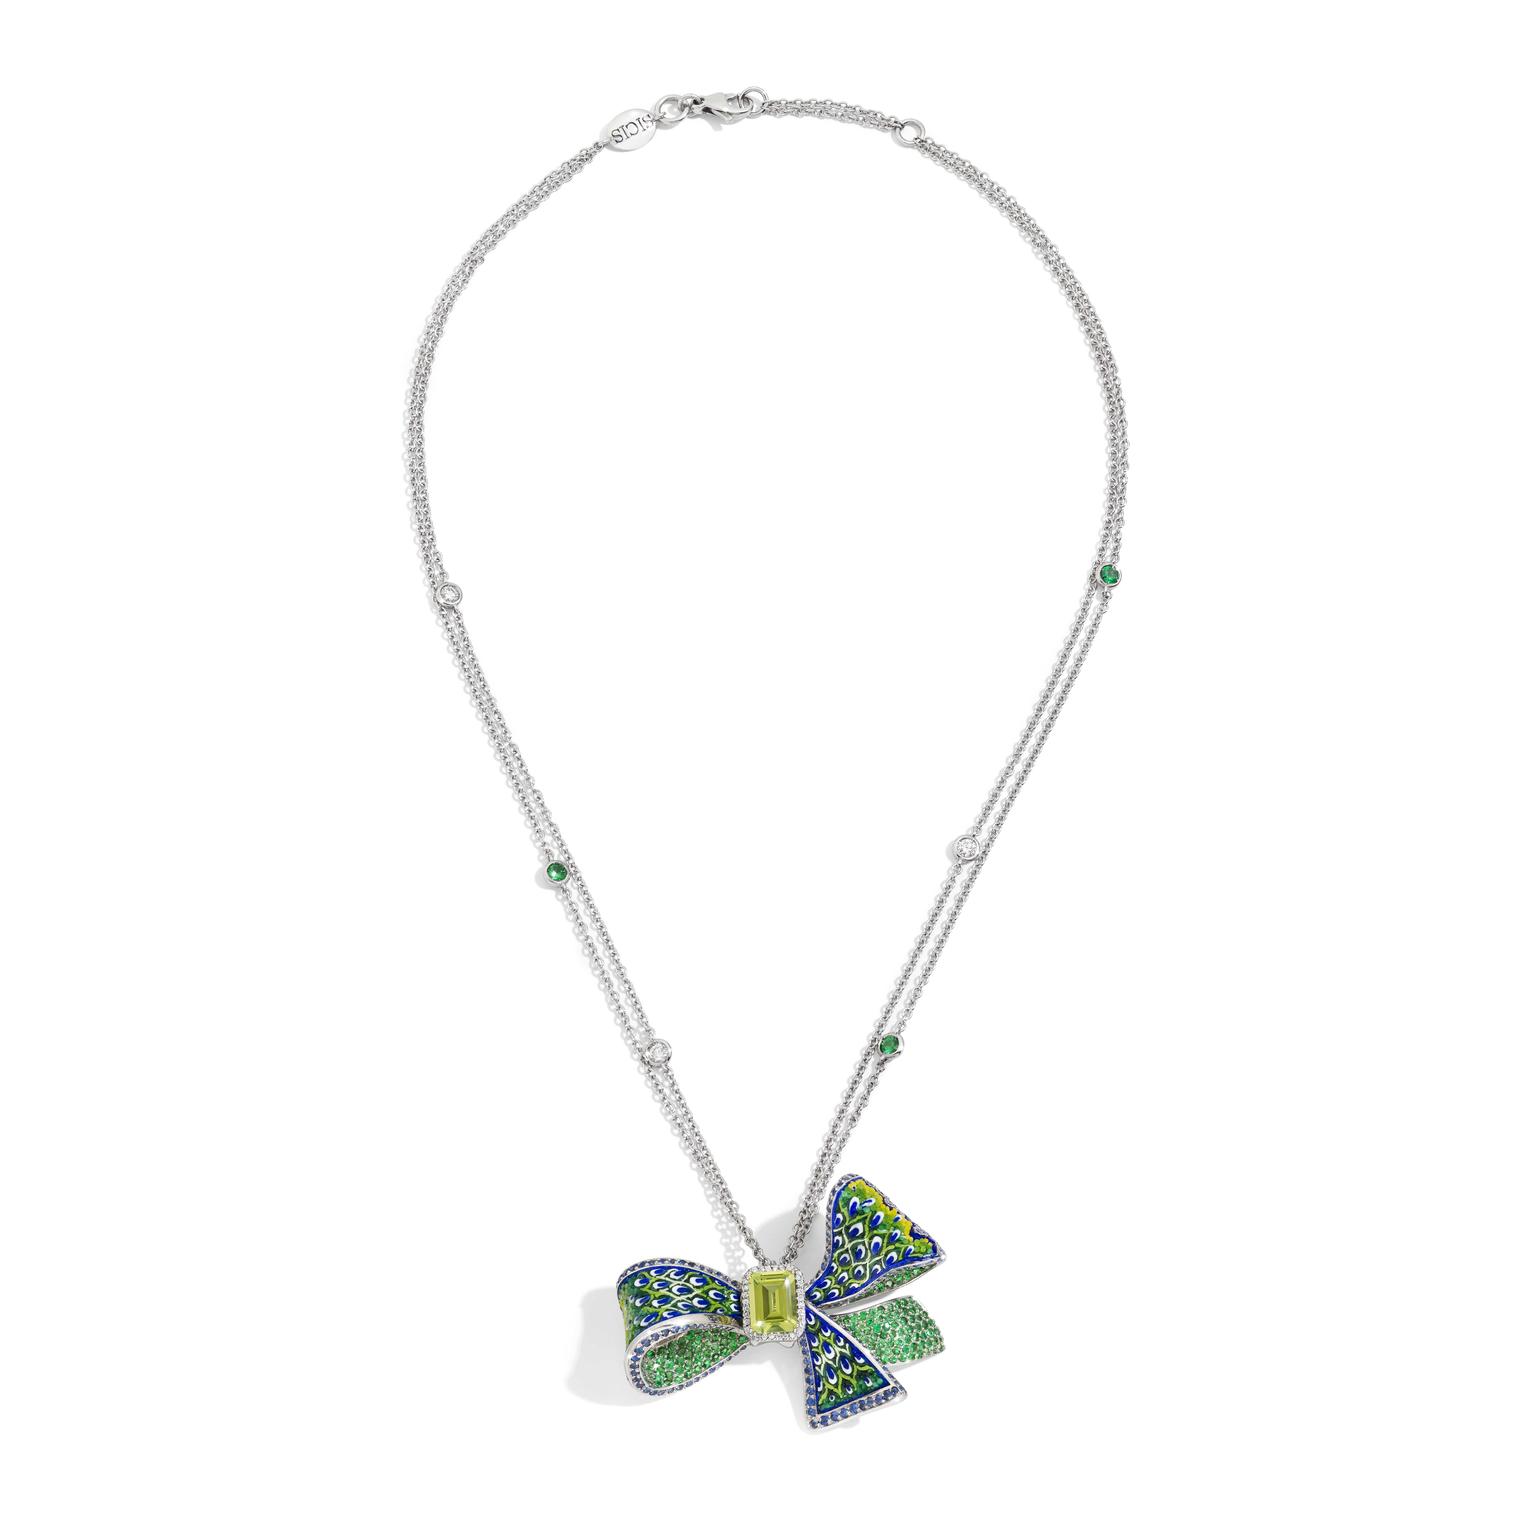 Green Ribbon necklace by sicis